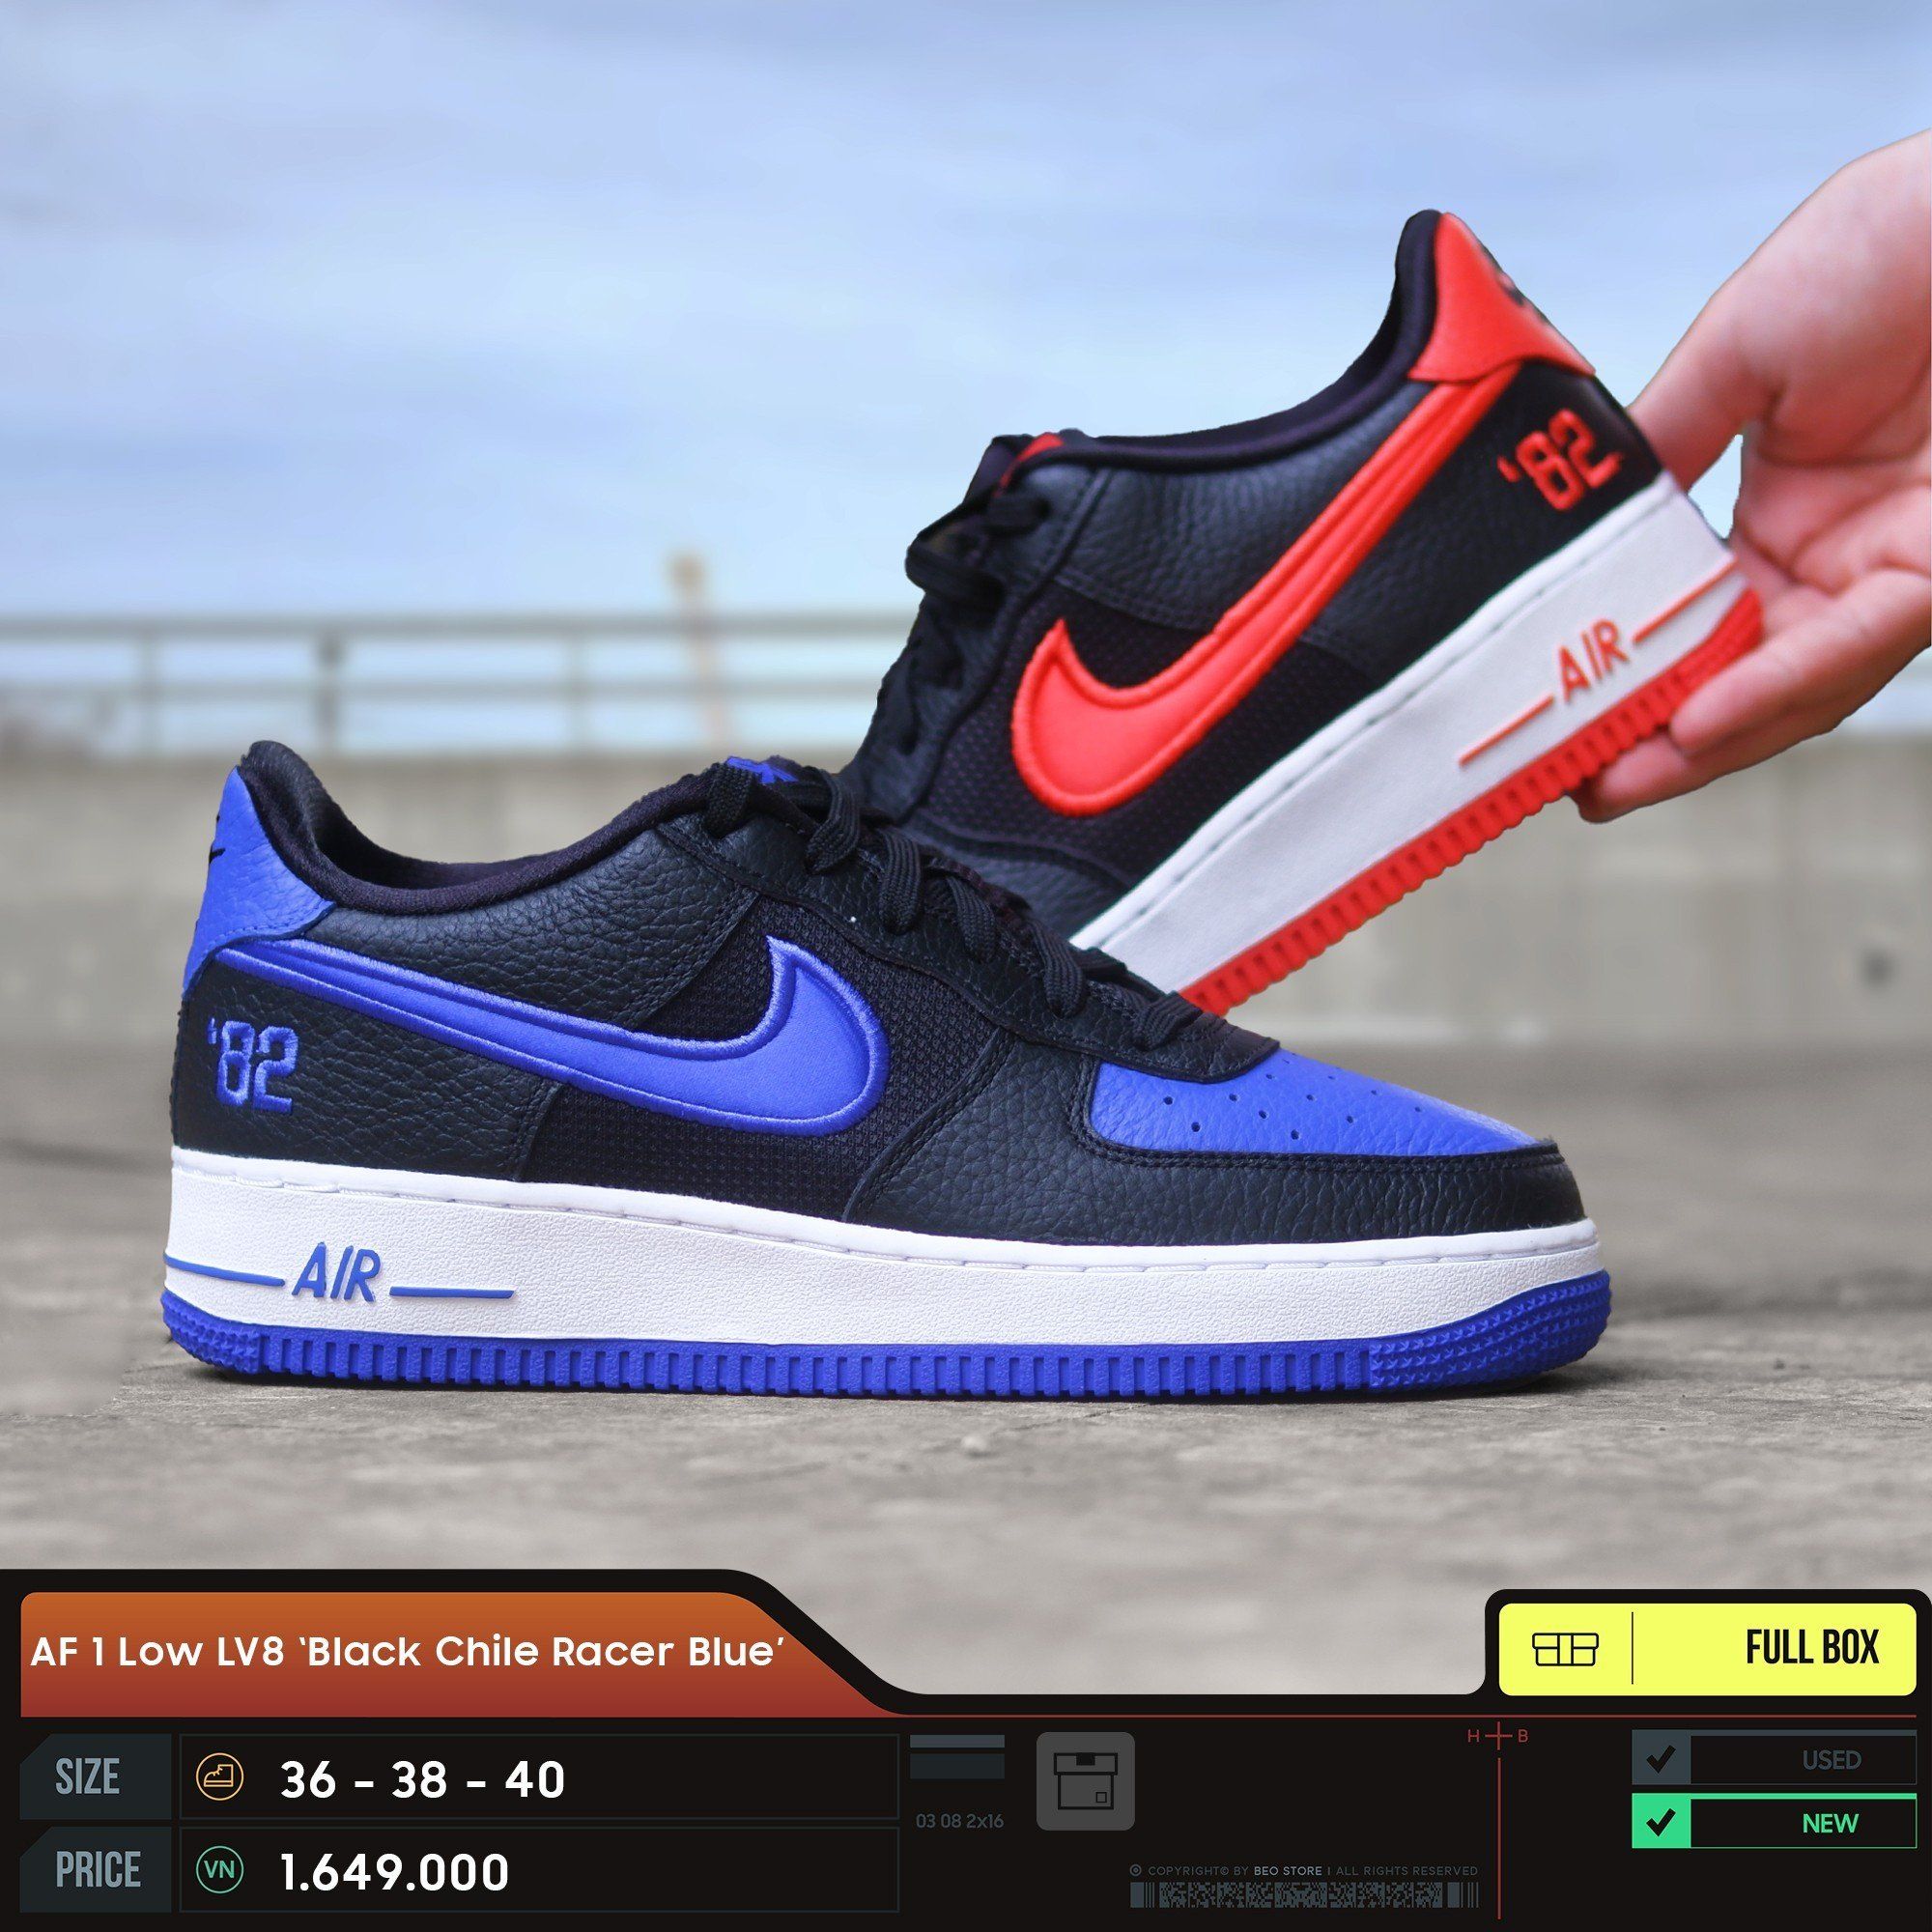 Nike Air Force 1 LV8 GS Black Chile Racer Blue